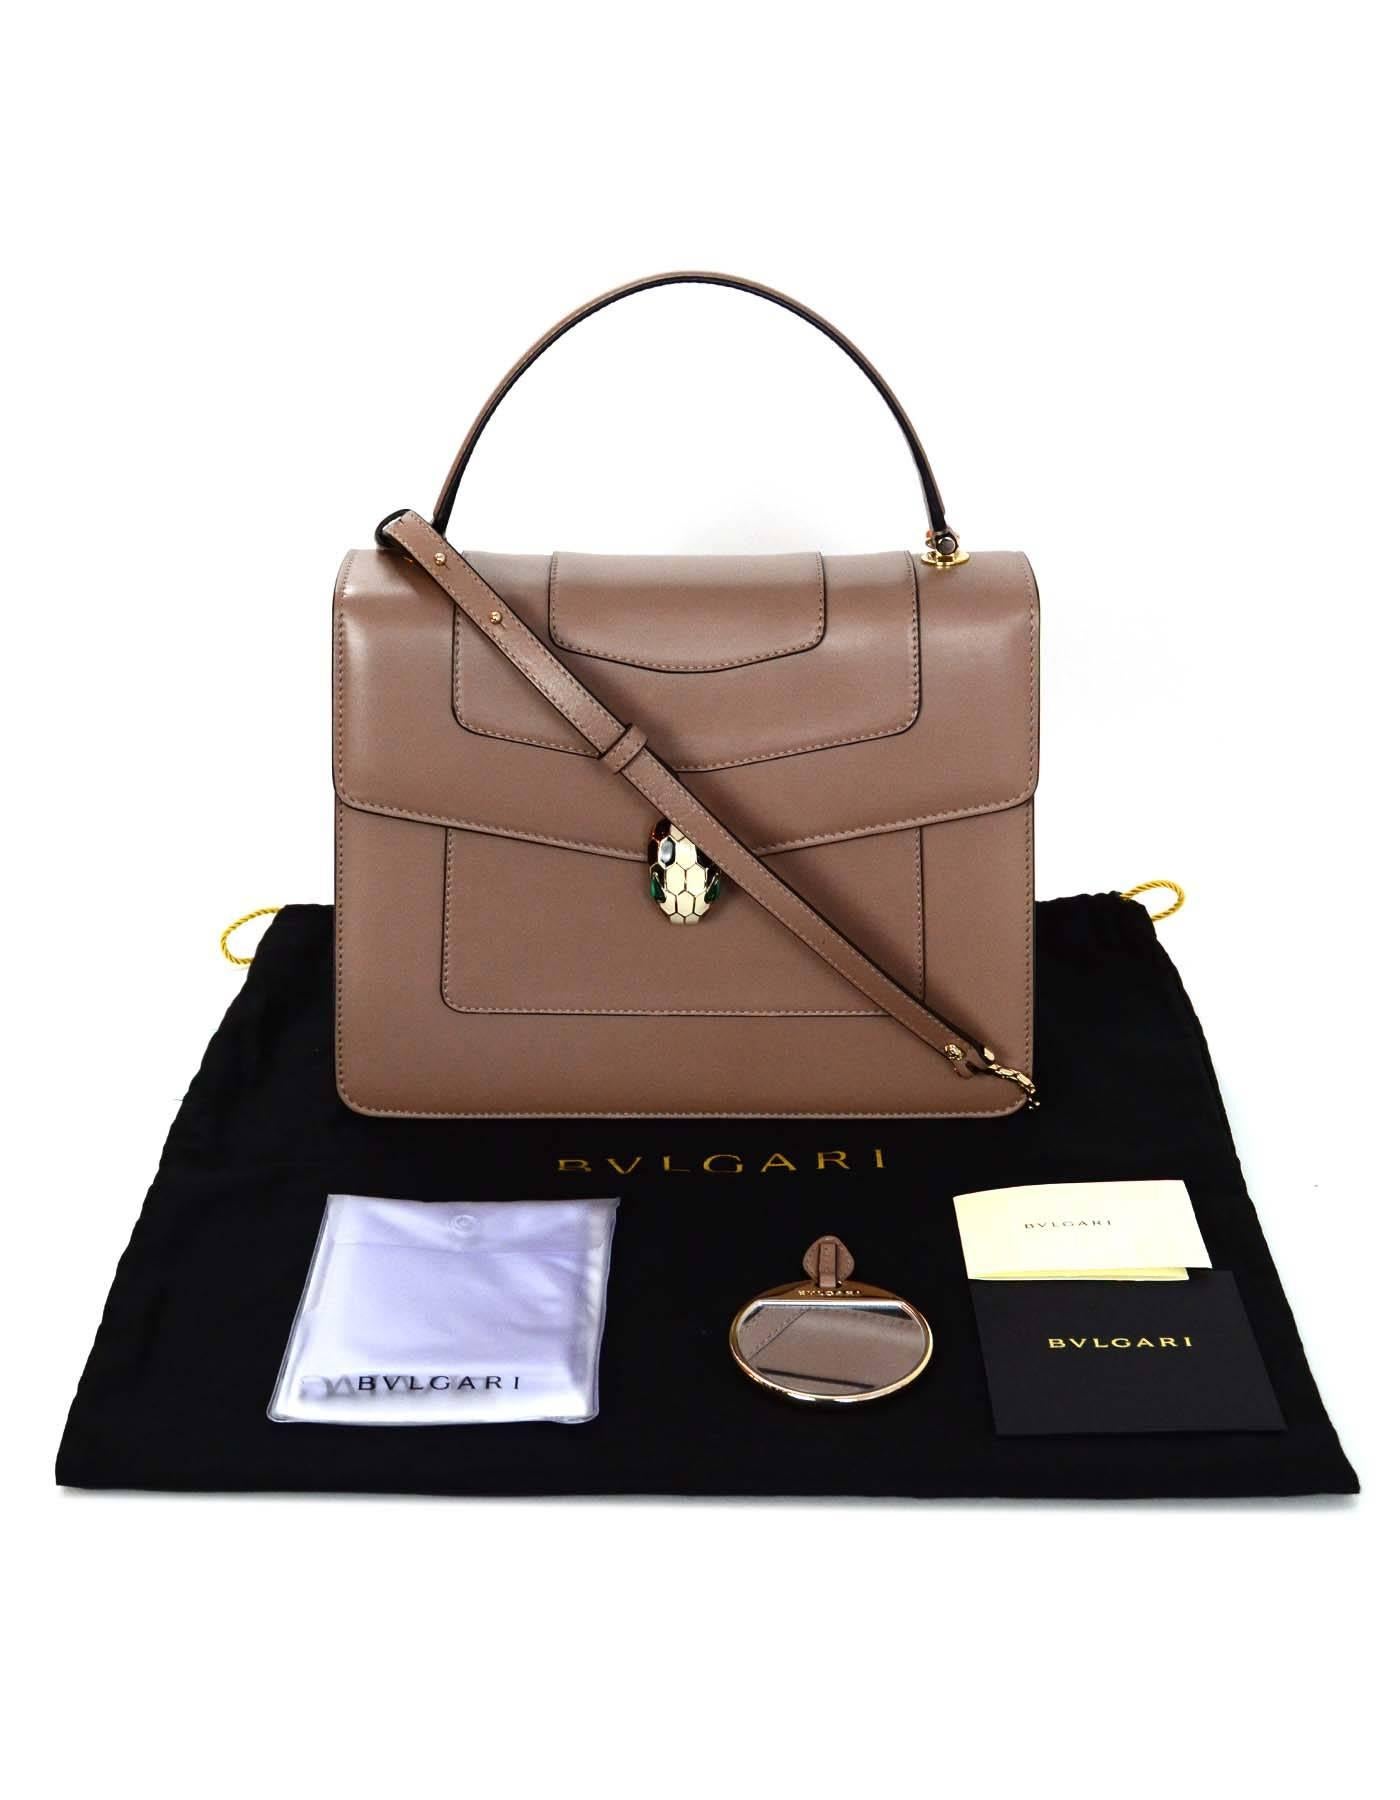  Bvlgari Taupe Leather Serpenti Forever Flap Cover Bag rt. $2, 800 2